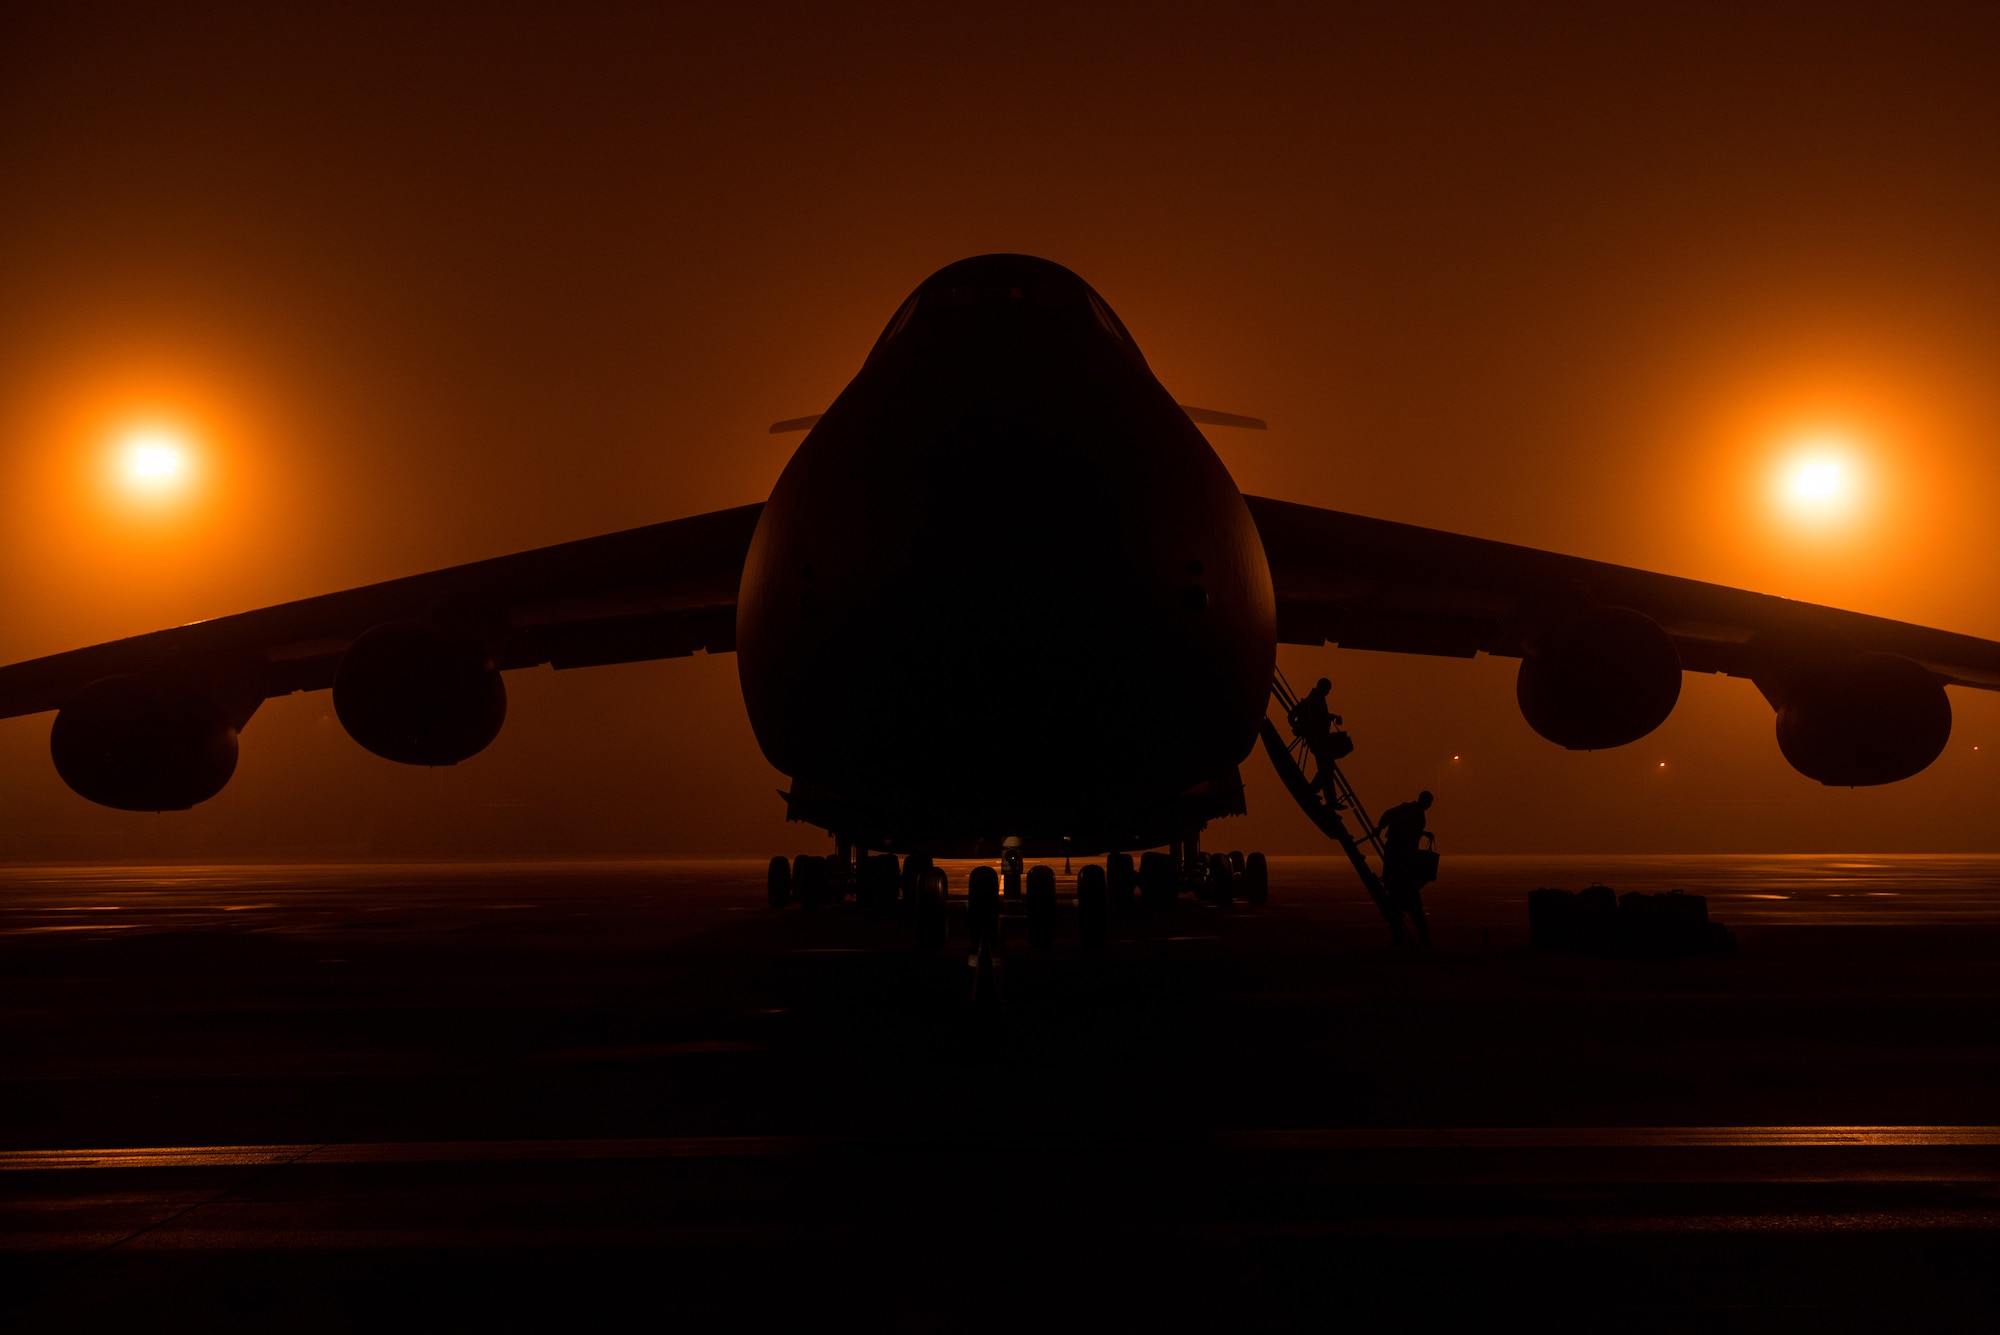 Airmen from the 22nd Airlift Squadron offload from a C-5M Super Galaxy aircraft during a Tuskegee Airmen heritage flight at Killeen-Fort Hood Regional Airport, Texas, Feb. 23, 2018. The flight consisted of an all-black C-5M crew that completed the mission, displayed pride in their heritage and showcased their ability to conduct rapid global mobility in today’s Air Force by delivering U.S. Army helicopters to the Central Command area of responsibility. (U.S. Air Force photo by Master Sgt. Joey Swafford)